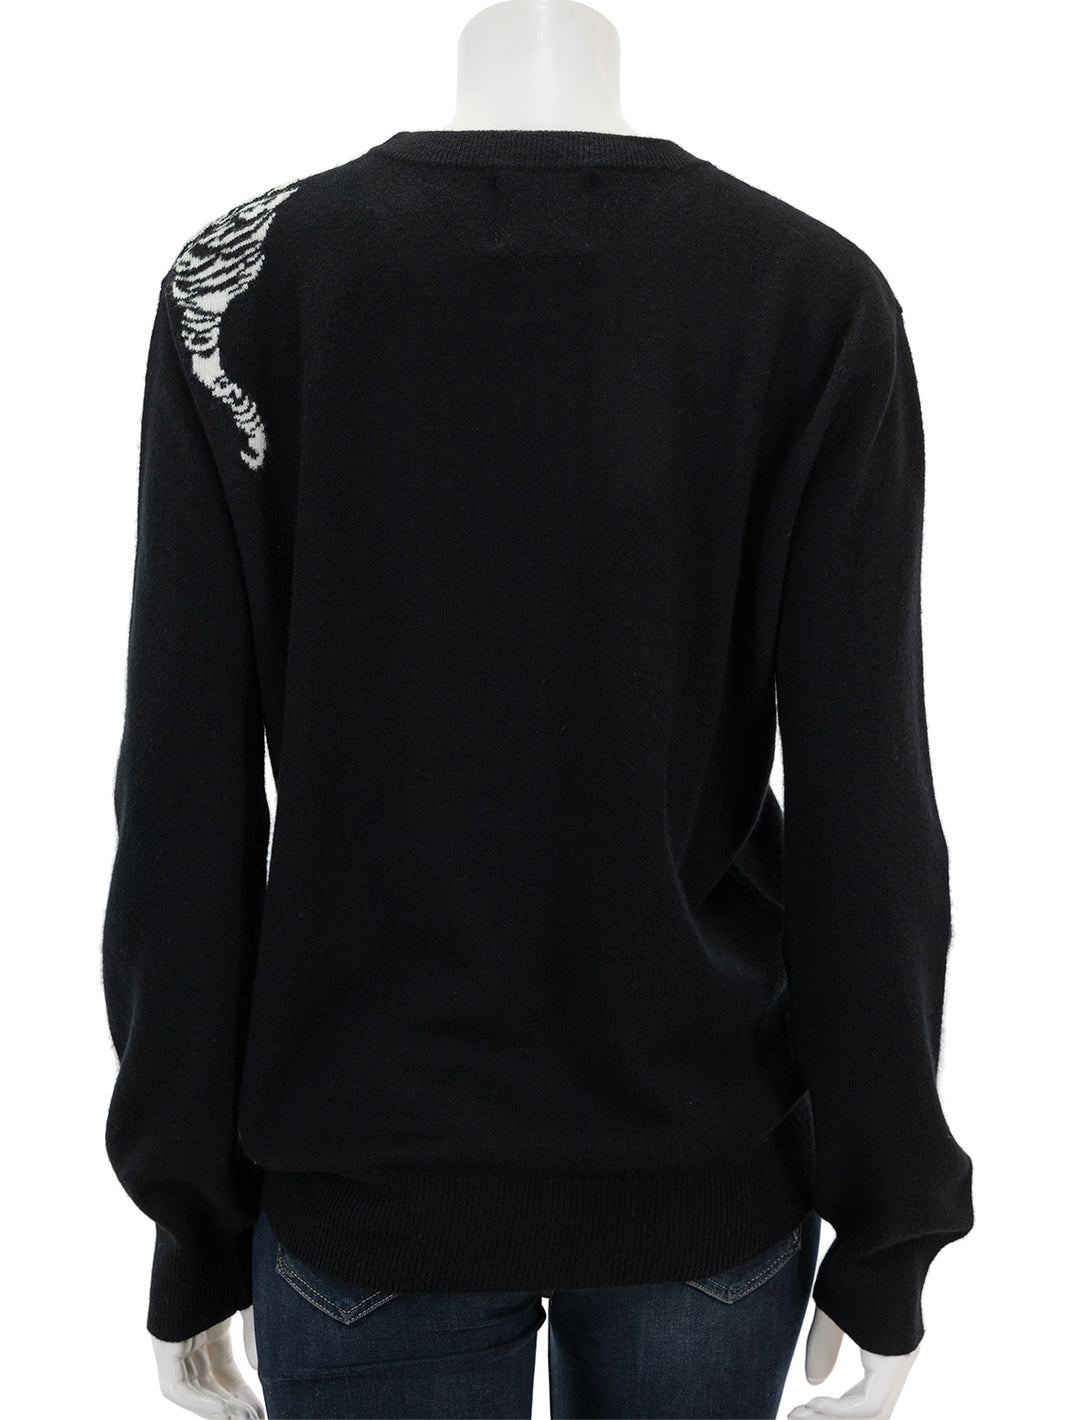 Back view of Jumper 1234's creeping tiger crew in black.